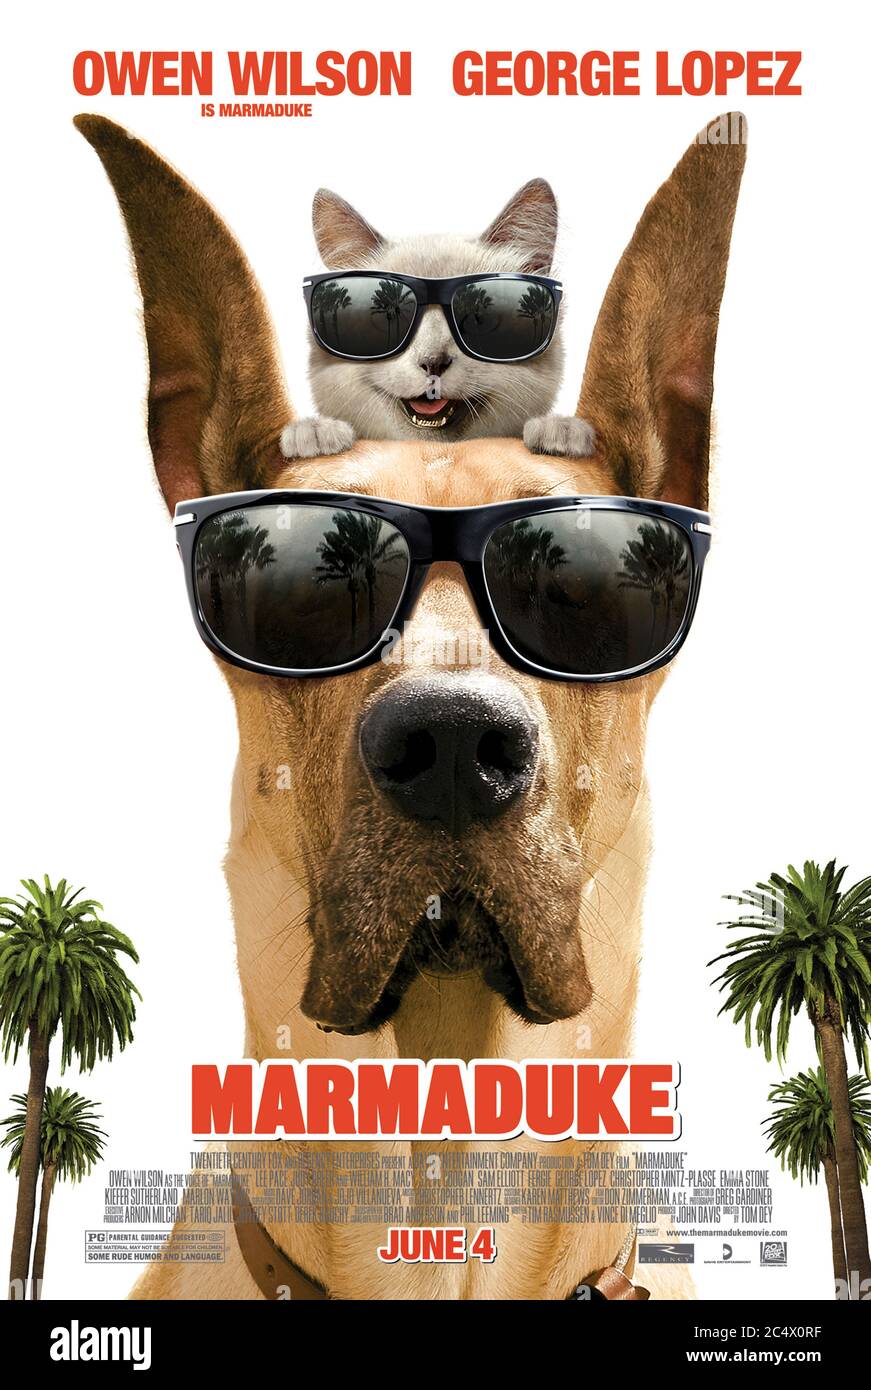 Marmaduke (2010) directed by Tom Dey and starring Owen Wilson, Judy Greer, Lee Pace and Emma Stone. Comedy based on the much loved comic strip Great Dane who causes havoc after a rural family move to California. Stock Photo